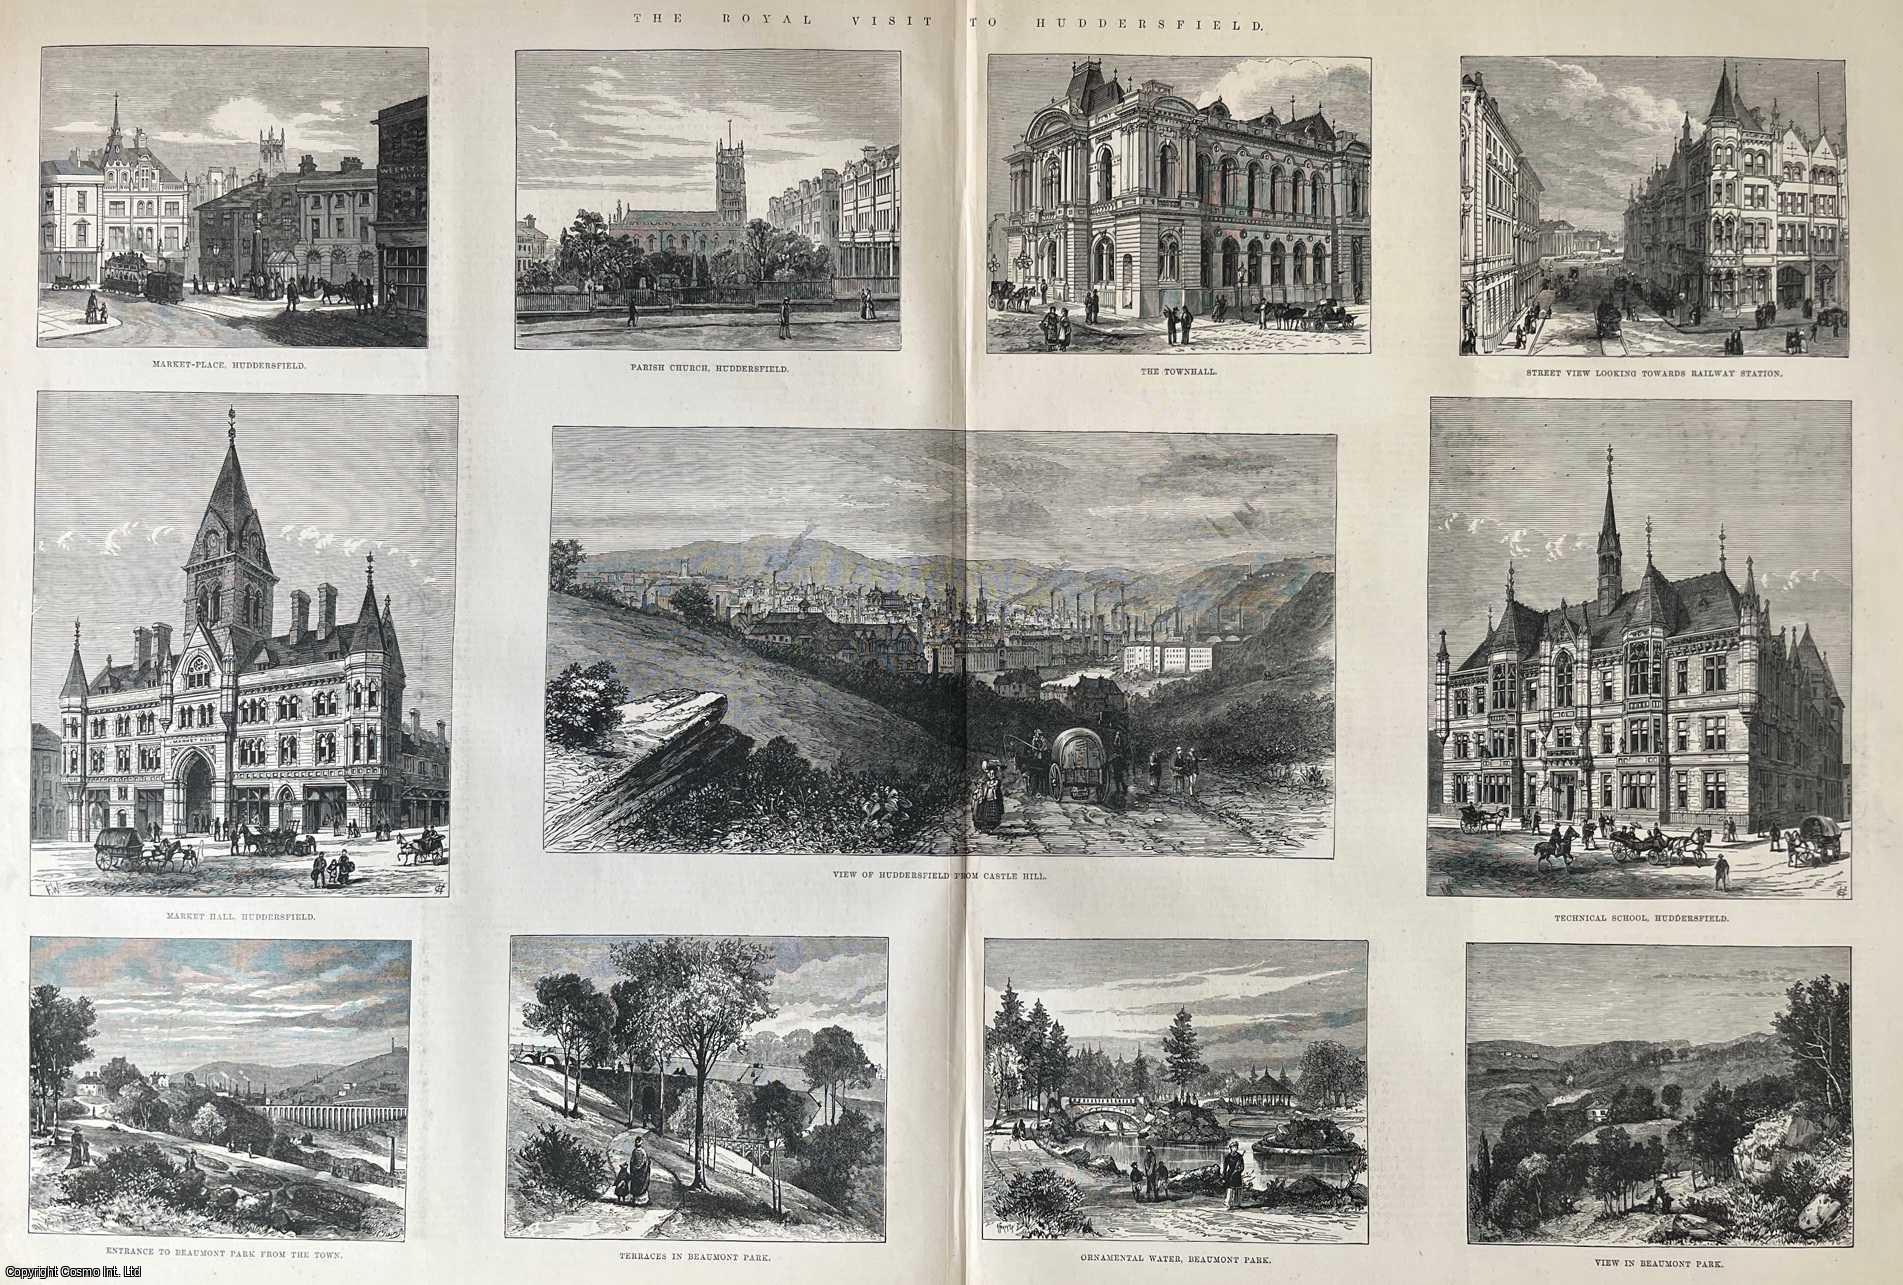 HUDDERSFIELD - Scenes of Huddersfield, including the Duke and Duchess of Albany Opening Beaumont Park. A collection of original woodcut engravings, with brief accompanying text overleaf, from the Illustrated London News, 1883.